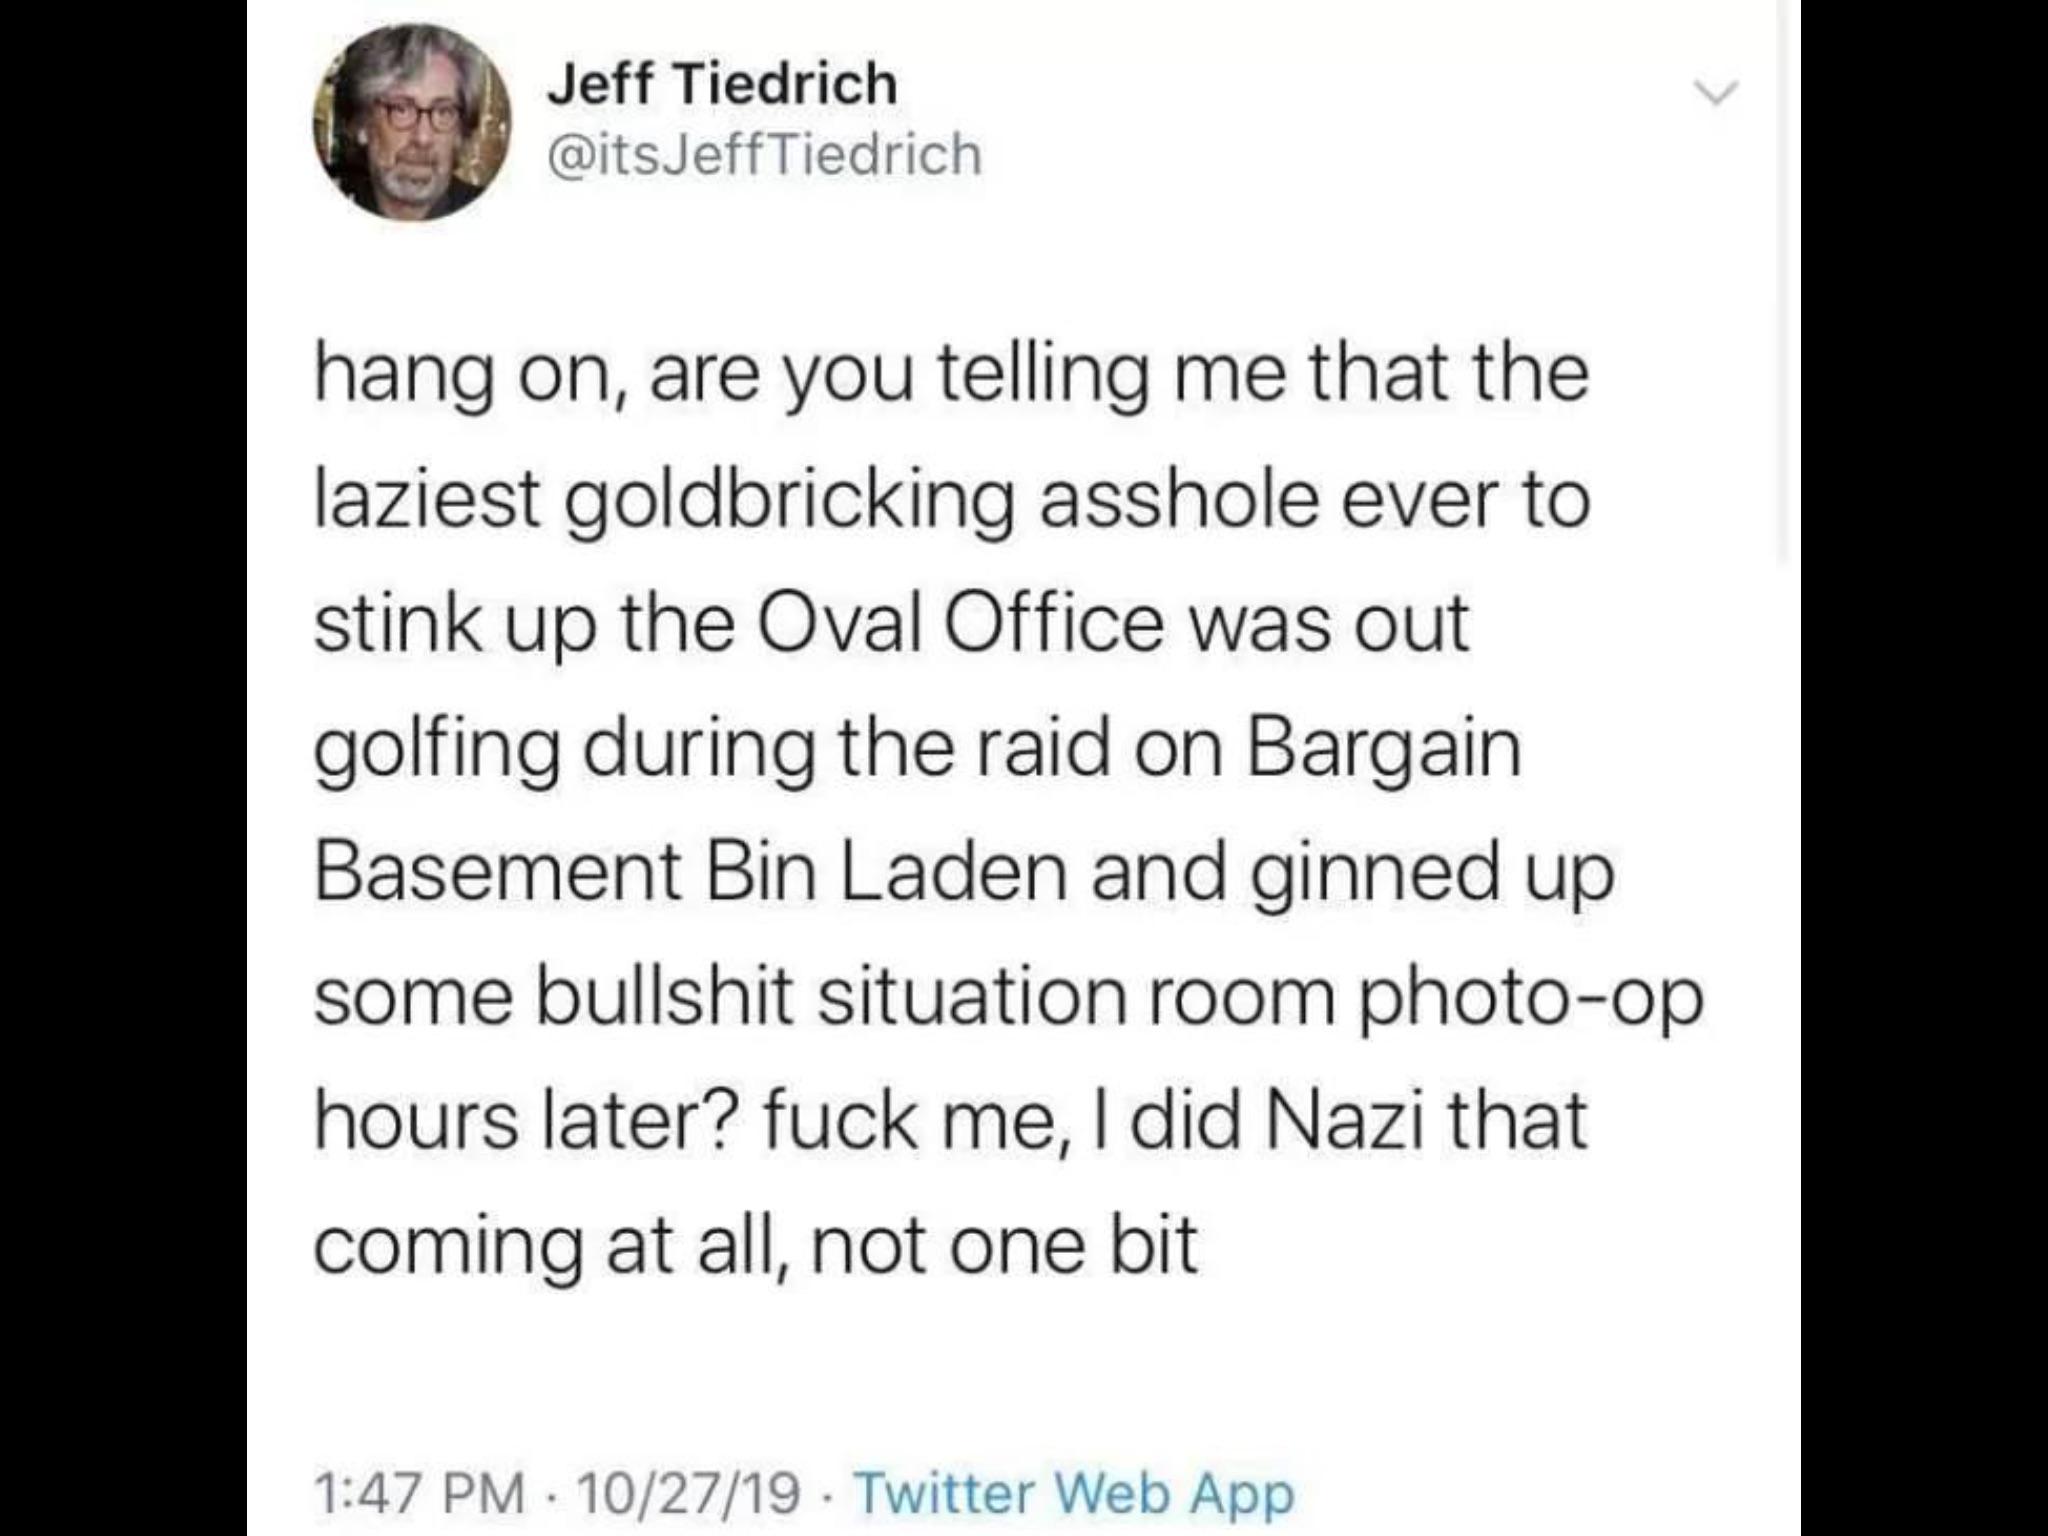 political political-memes political text: Jeff Tiedrich @itsJeffTiedrich hang on, are you telling me that the laziest goldbricking asshole ever to stink up the Oval Office was out golfing during the raid on Bargain Basement Bin Laden and ginned up some bullshit situation room photo-op hours later? fuck me, I did Nazi that coming at all, not one bit 1:47 PM • 10/27/19 • Twitter Web APP 